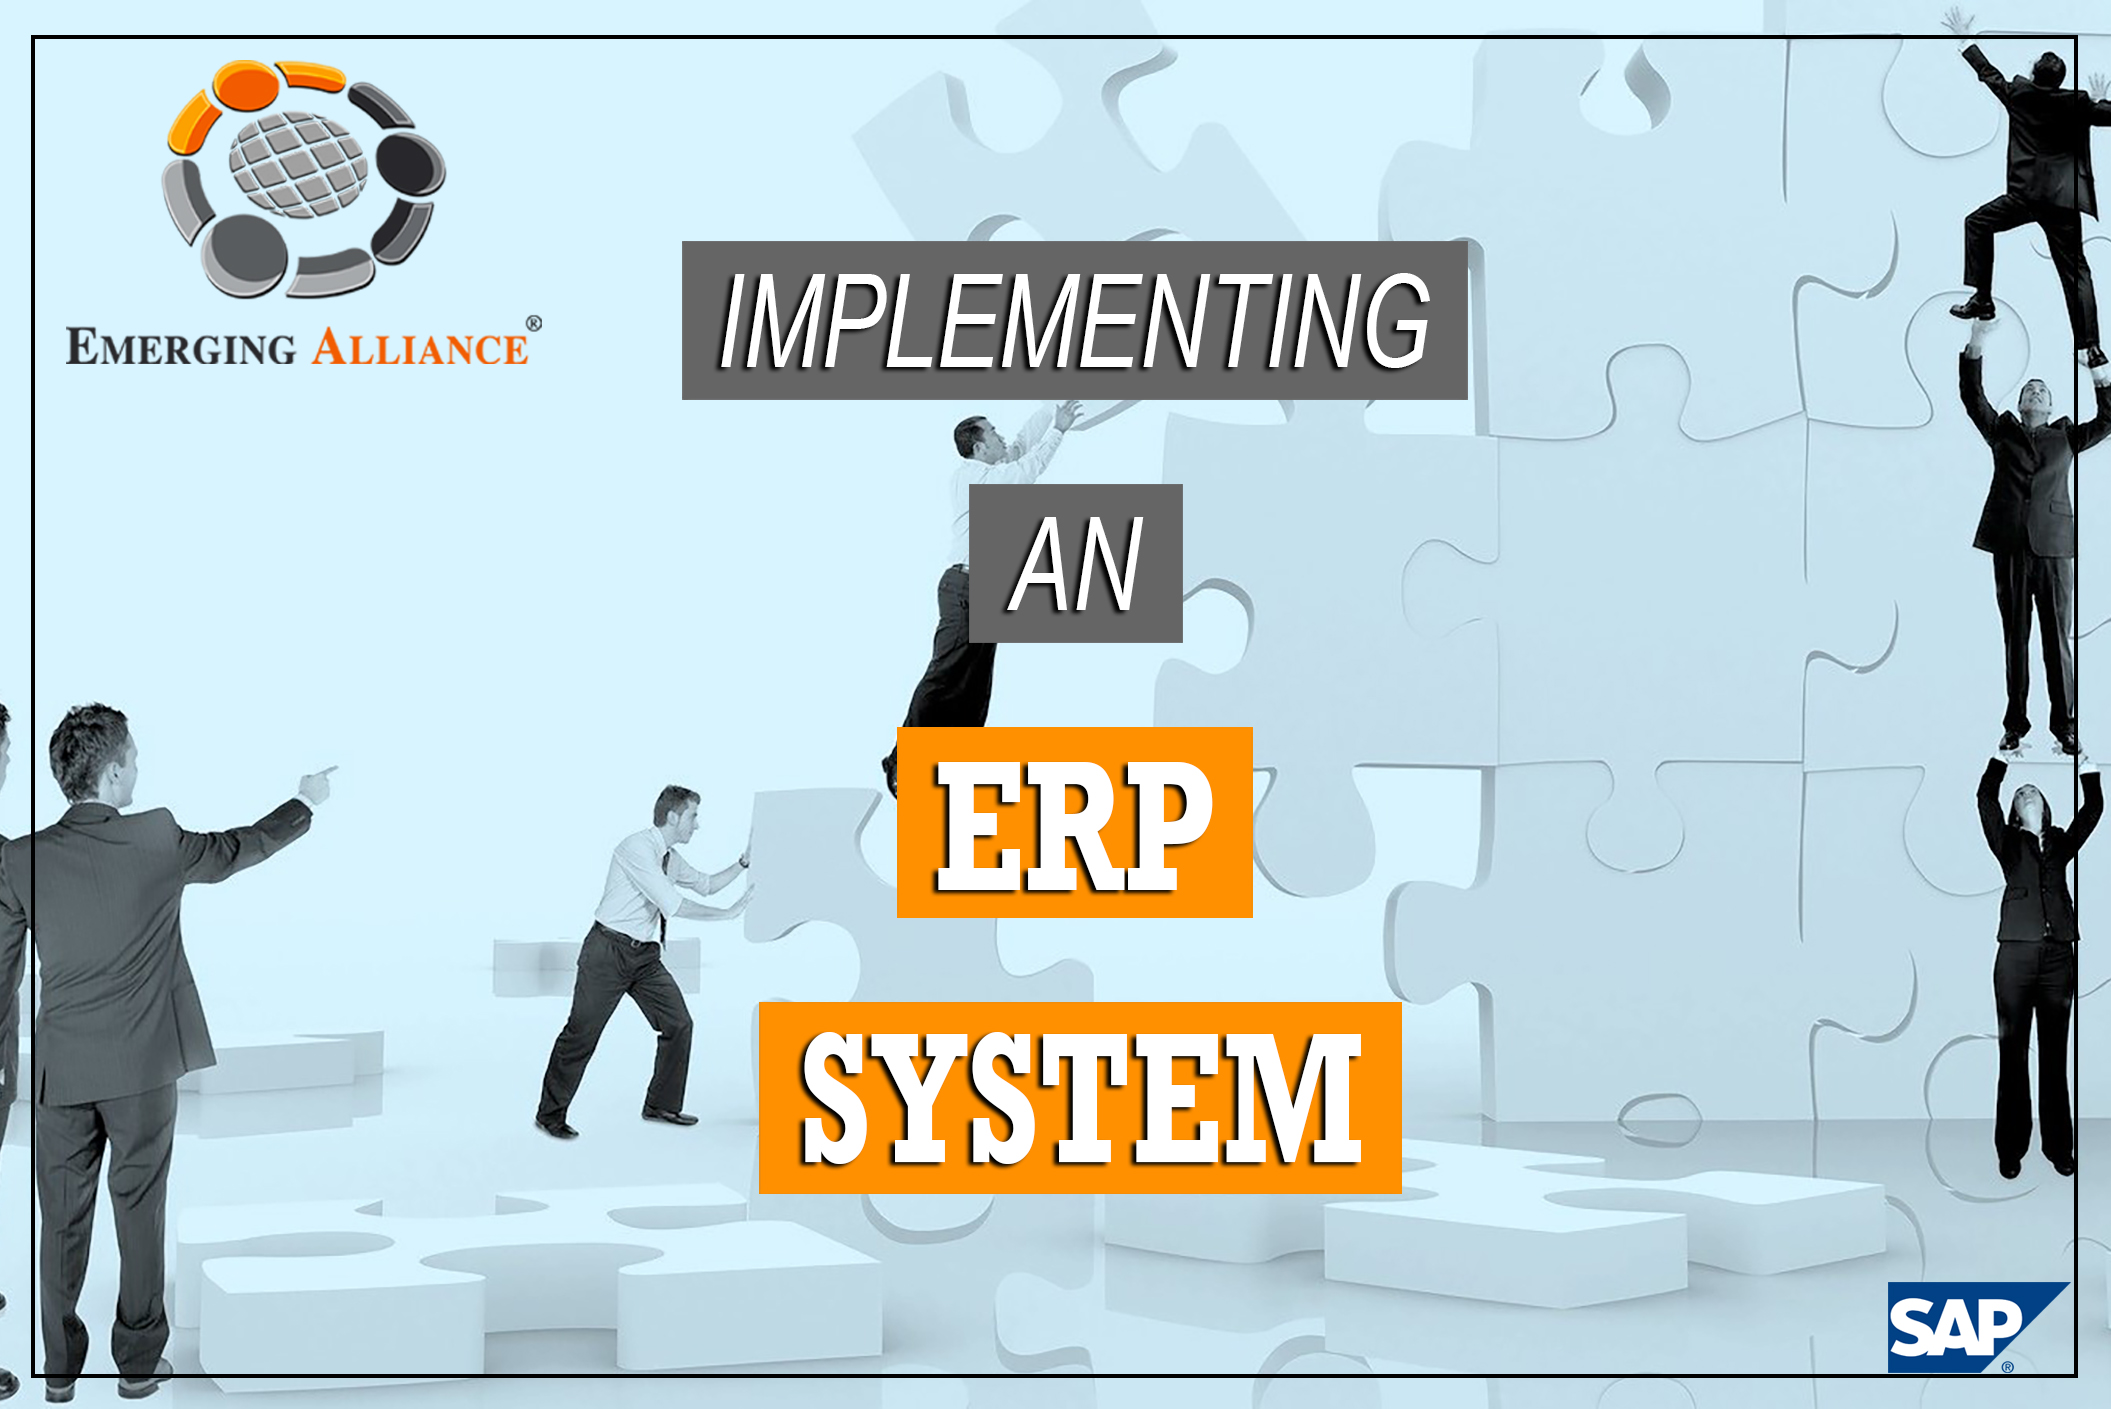 IMPLEMENTING AN ERP SYSTEM